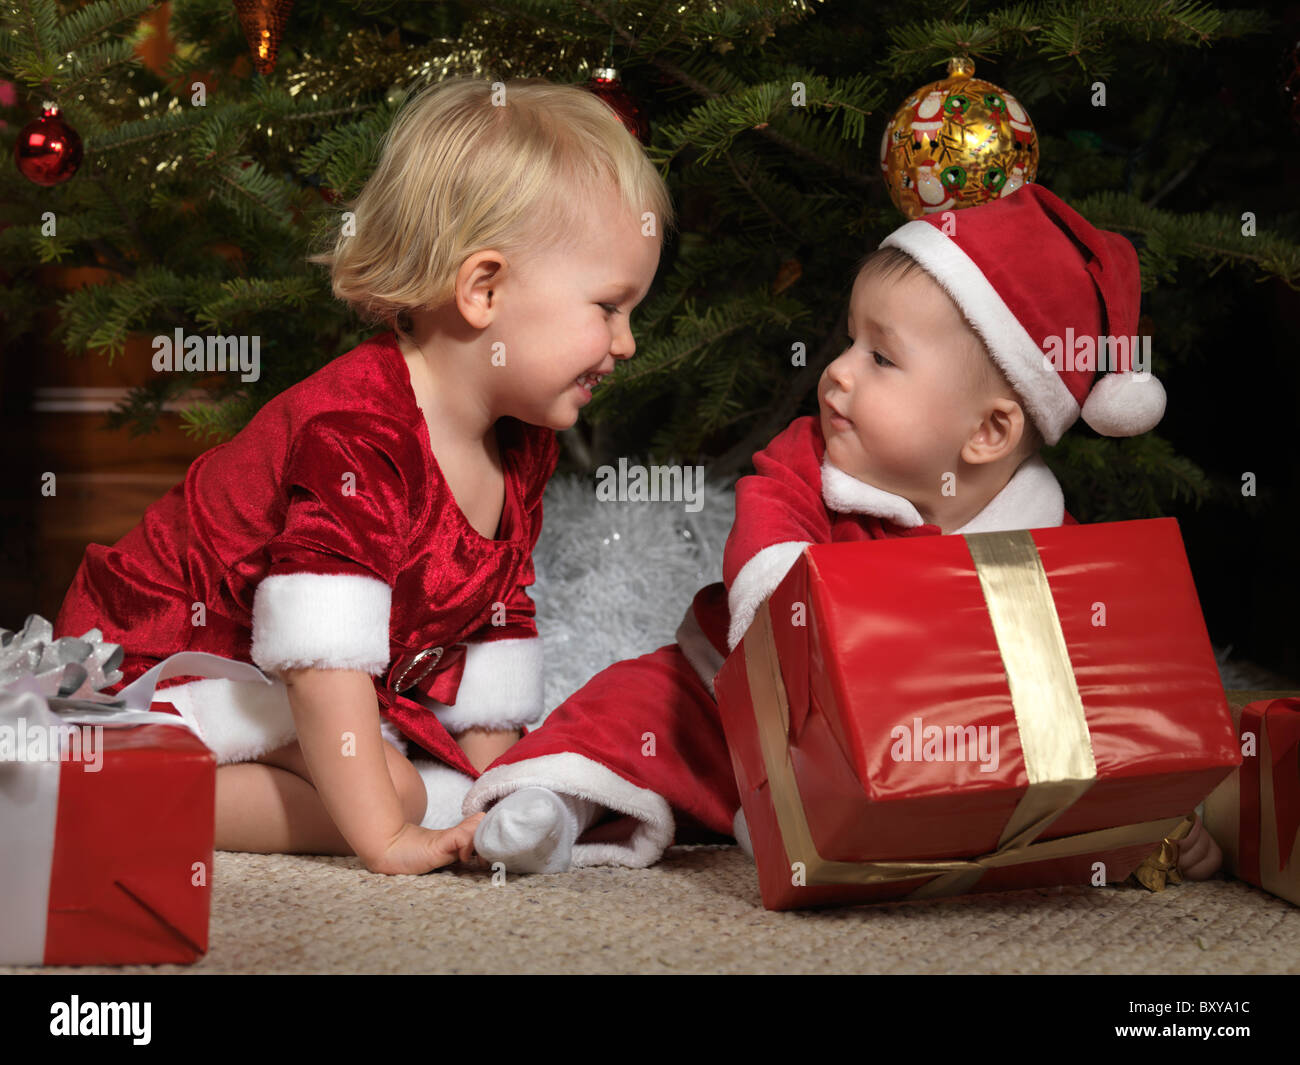 License available at MaximImages.com - Eight month old baby boy doesn't want to share his Christmas gifts with a two year old girl Stock Photo